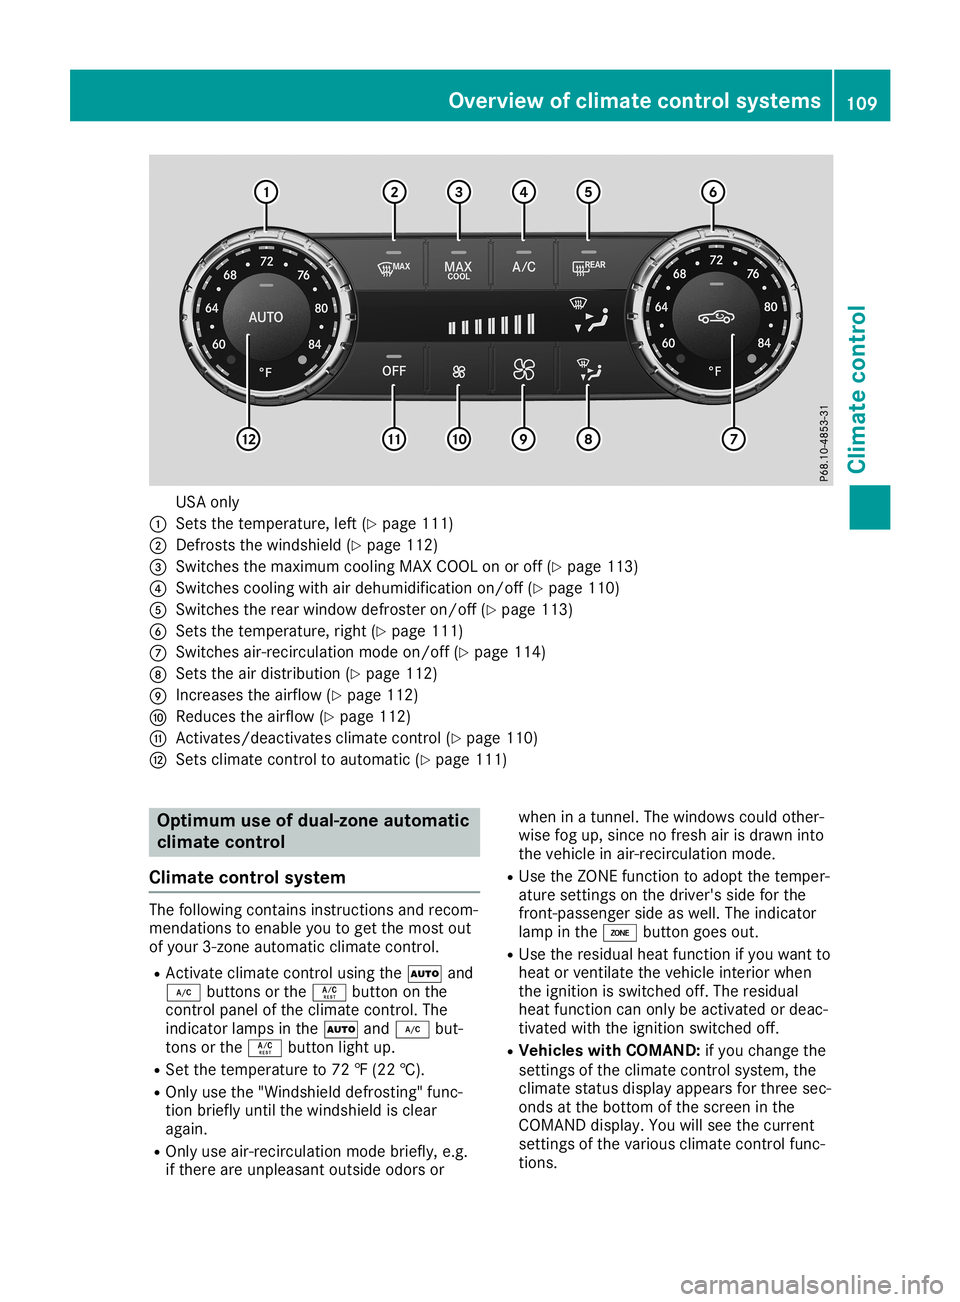 MERCEDES-BENZ SLC ROADSTER 2019  Owners Manual USA
only
0043 Sets thetemperature, left(Ypage 111)
0044 Defrosts thewindshiel d(Y page 112)
0087 Switches themaximum coolingMAXCOOL onoroff (Ypage 113)
0085 Switches coolingwithairdehumid ificationon/